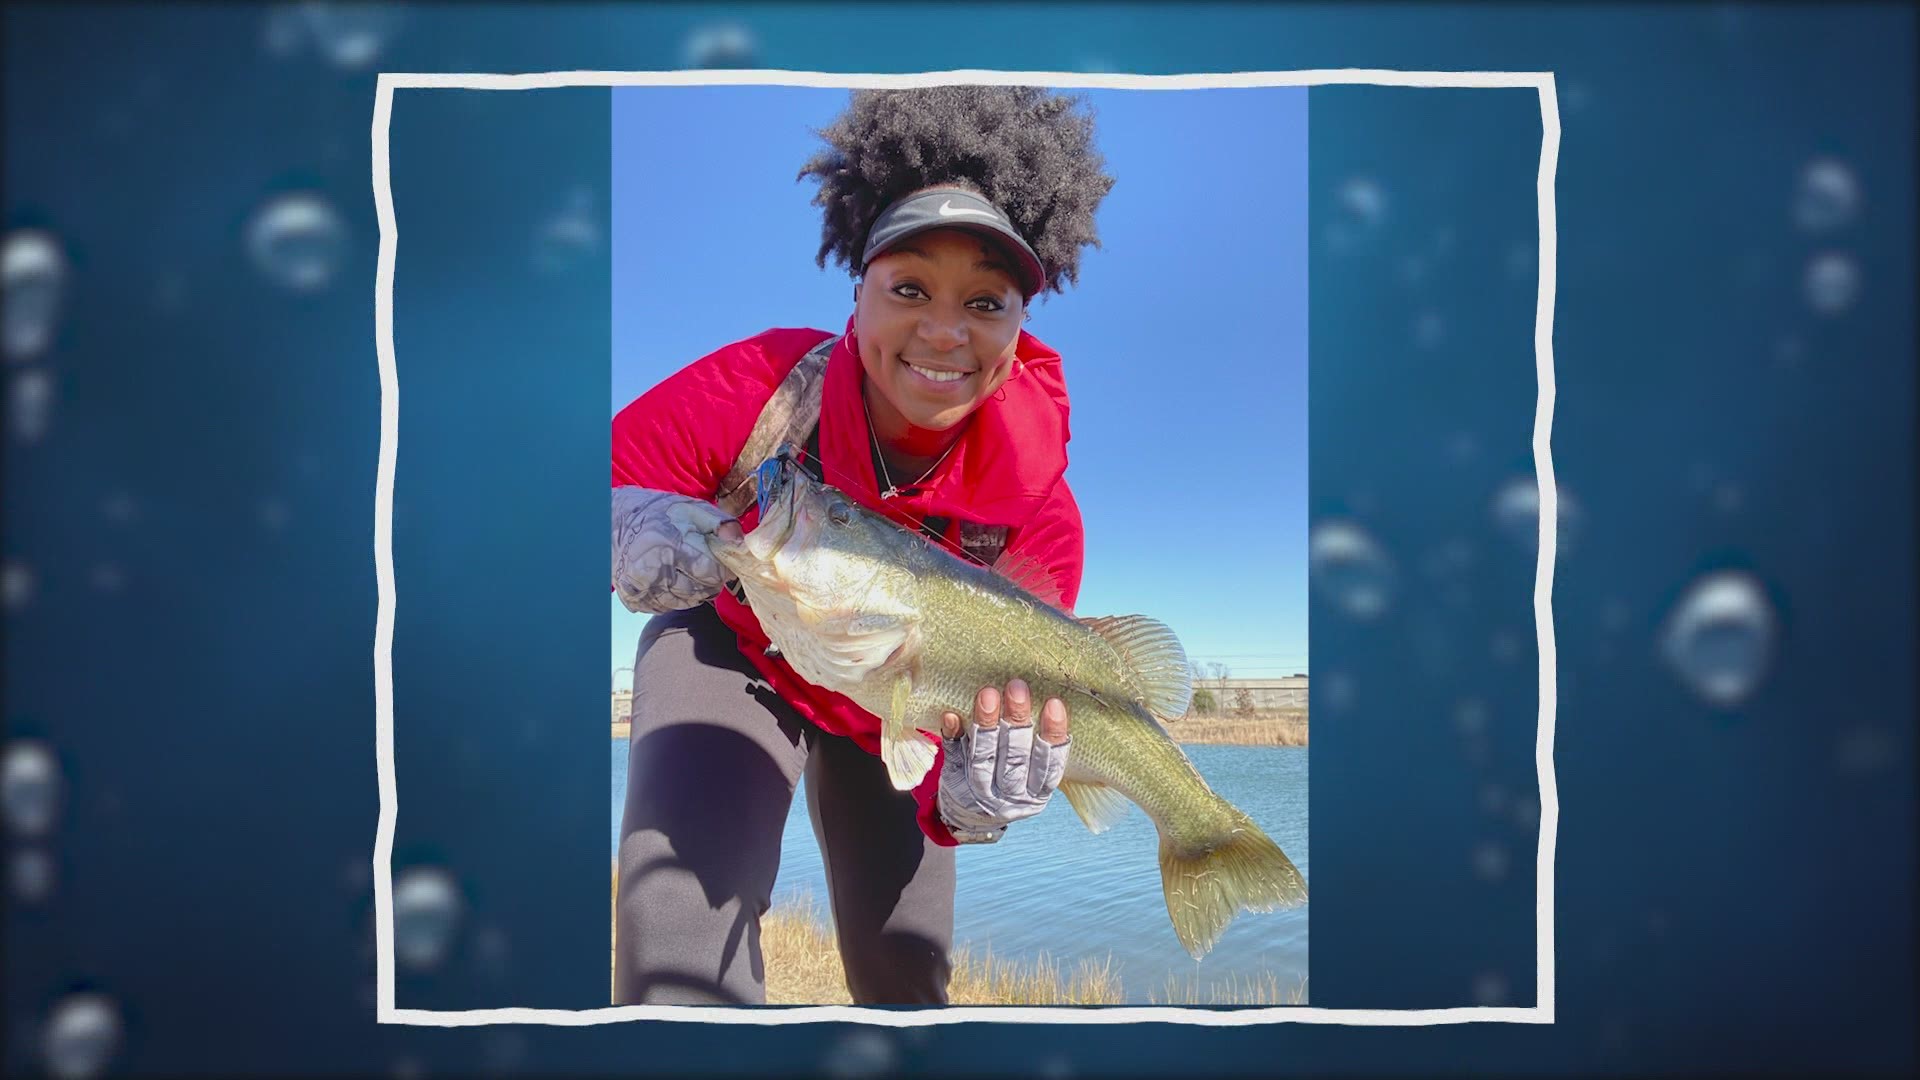 She calls herself Castaway Jaz, and her goal is to inspire more women to try fishing as a sport.